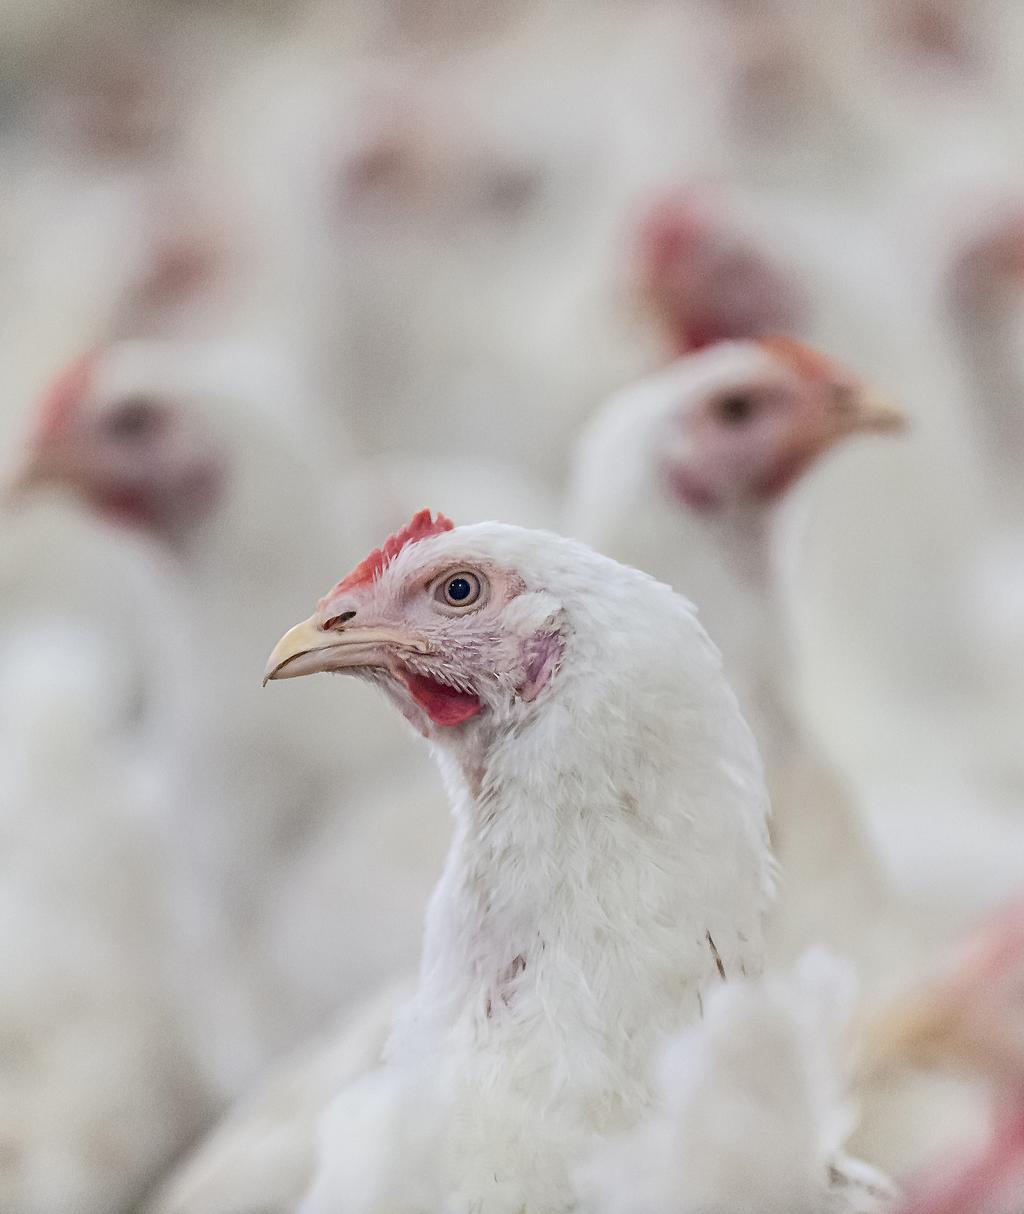 FACT SHEET: BROILER CHICKENS This fact sheet is designed to provide teachers with the information they need to teach students about how chickens are raised for meat in